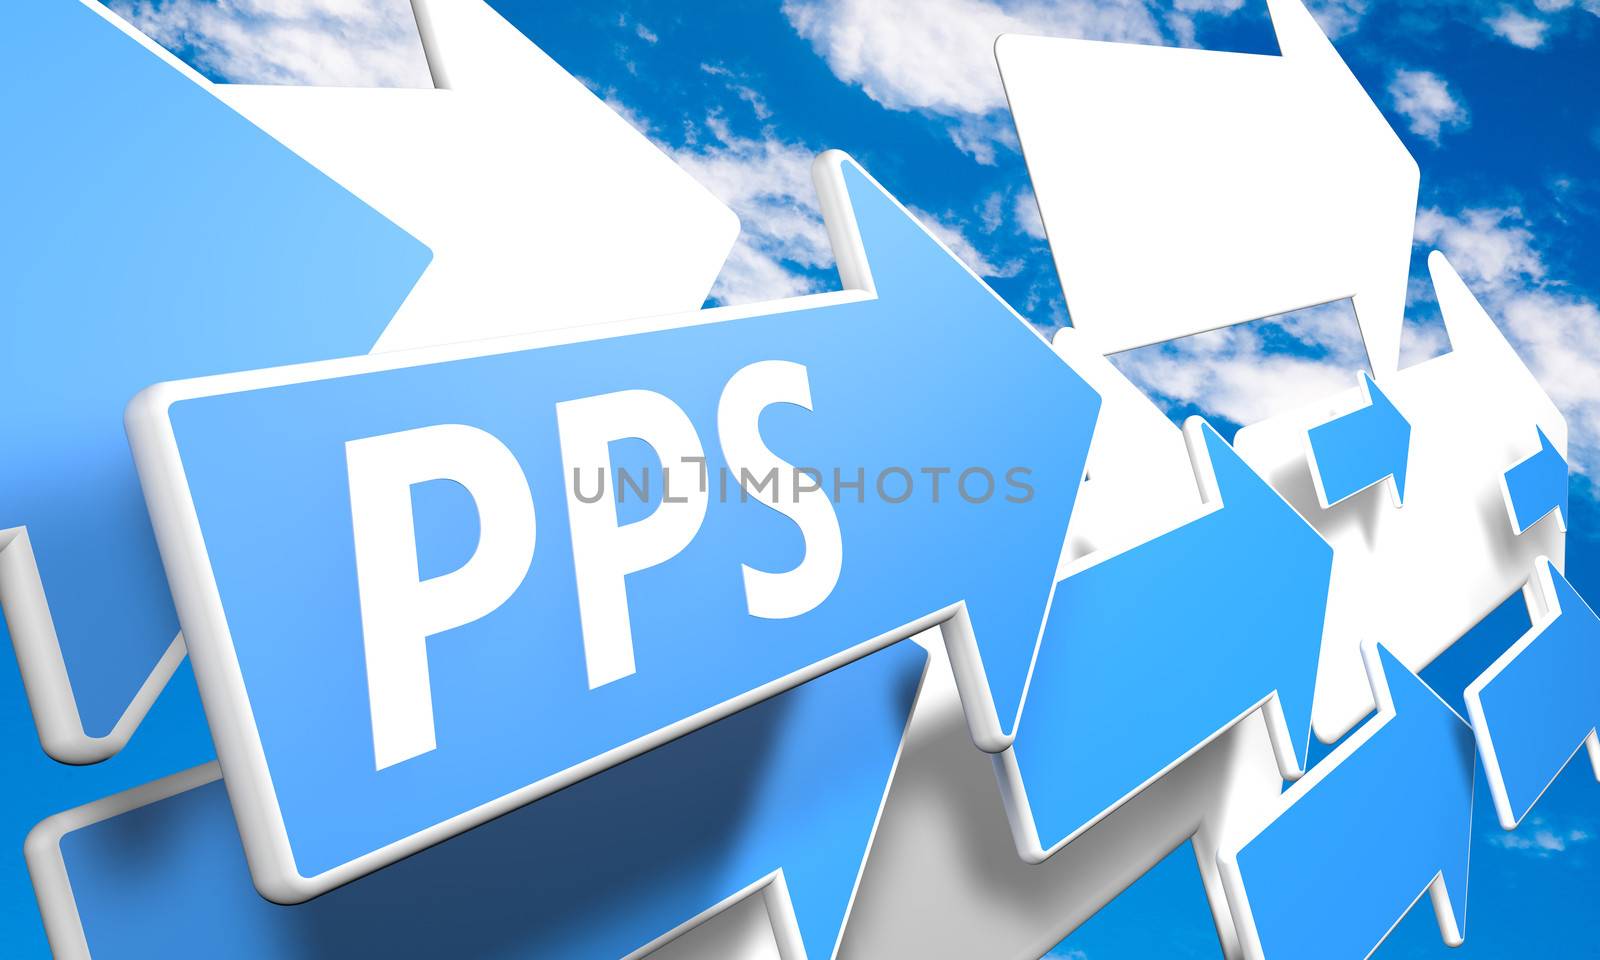 Pay per Sale 3d render concept with blue and white arrows flying upwards in a blue sky with clouds